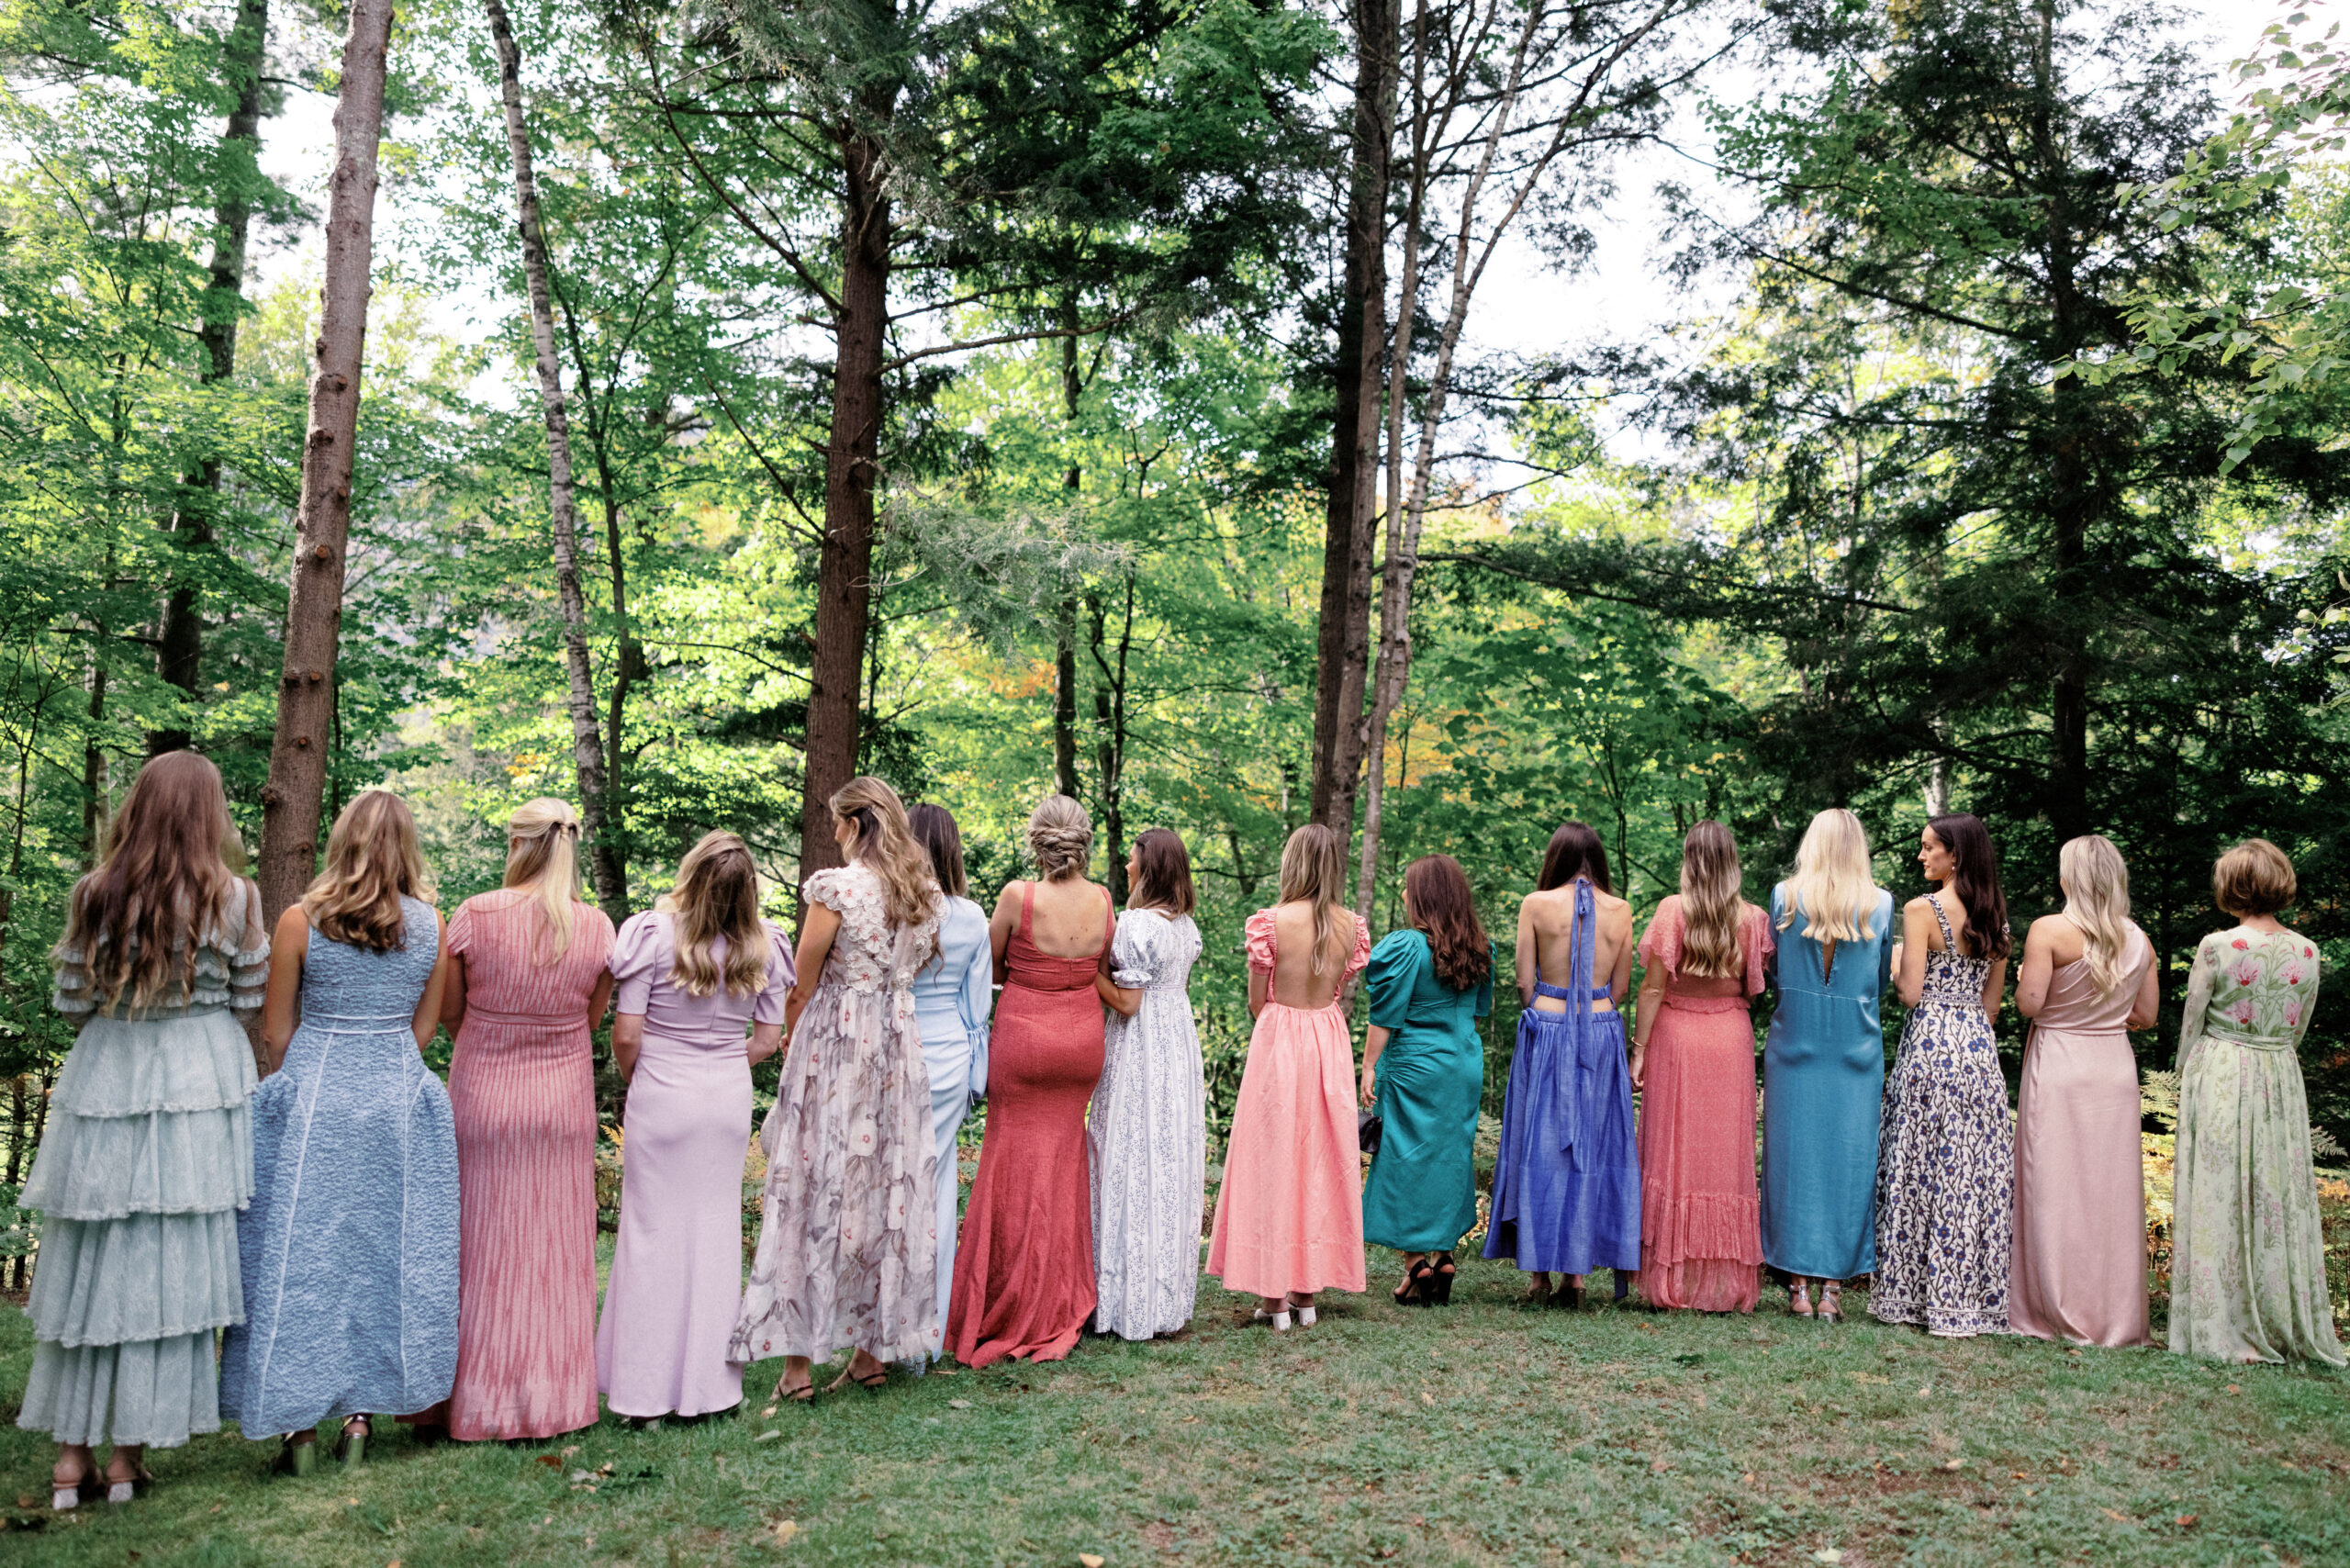 The bridesmaids are in one line, with backs turned from the bride. Upstate New York luxury wedding image by Jenny Fu Studio.